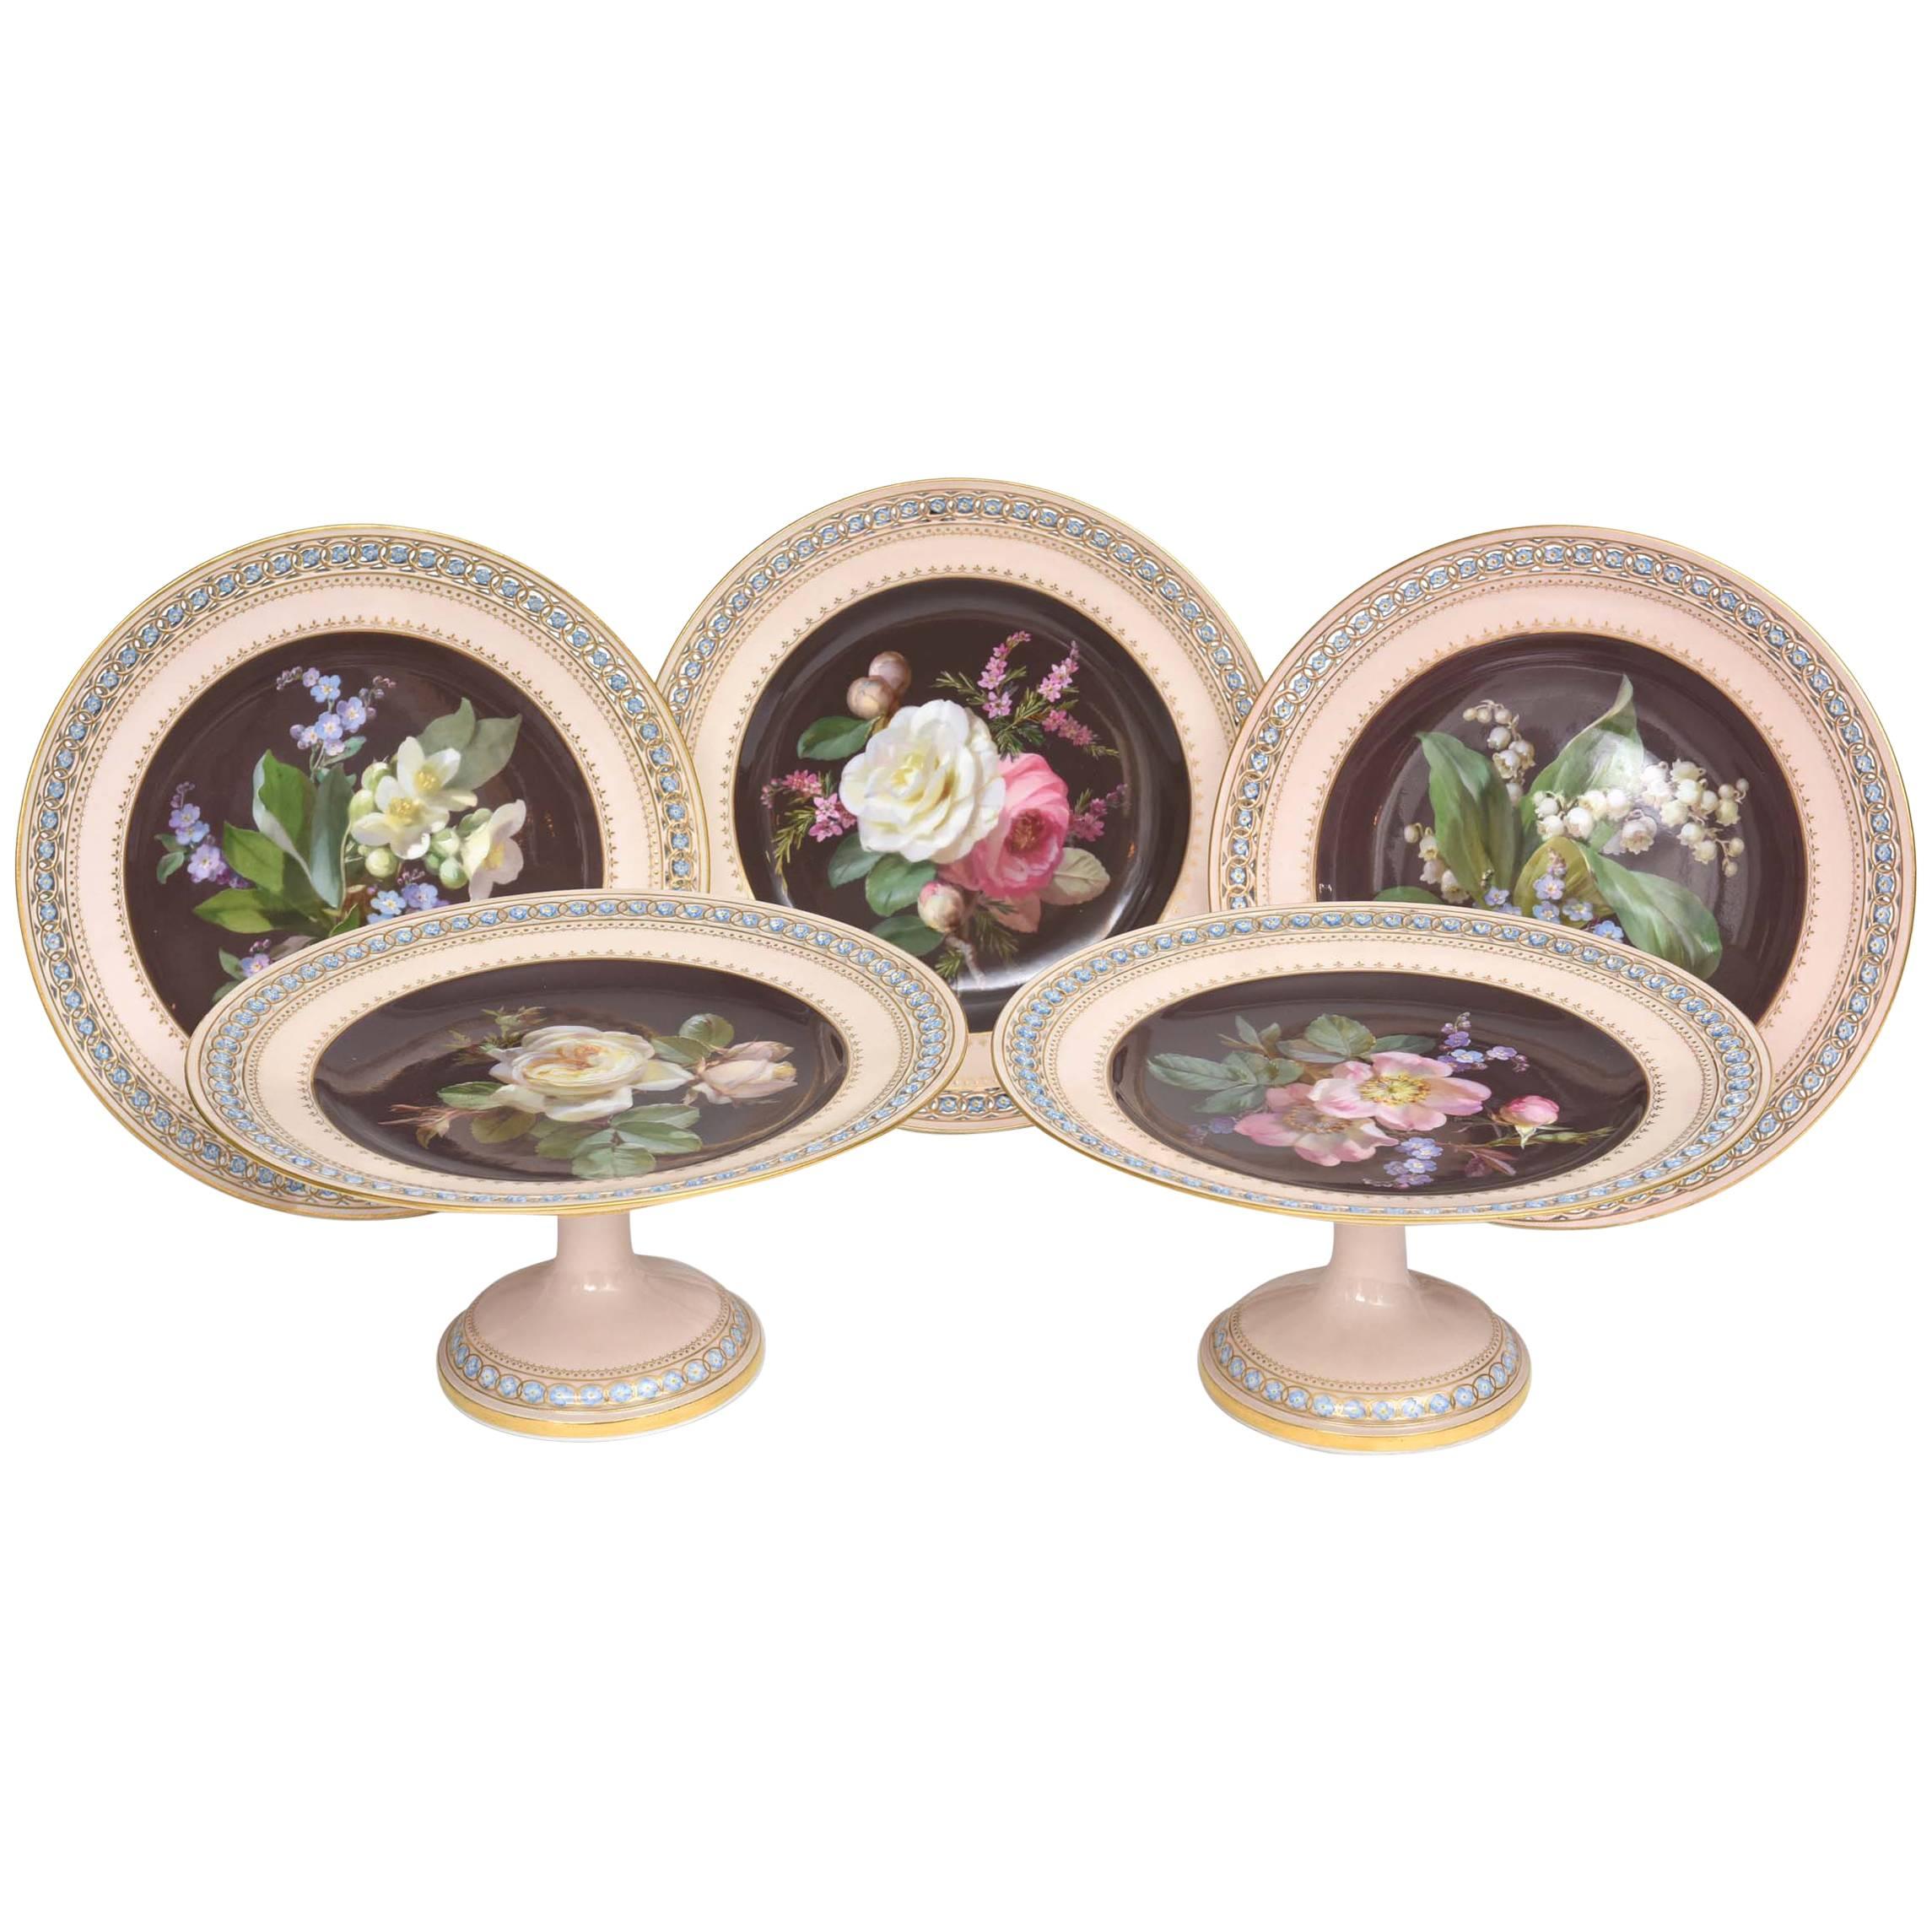 Rare Meissen Fine Porcelain Cabinet Pieces. Hand-Painted Botanicals, Reticulated